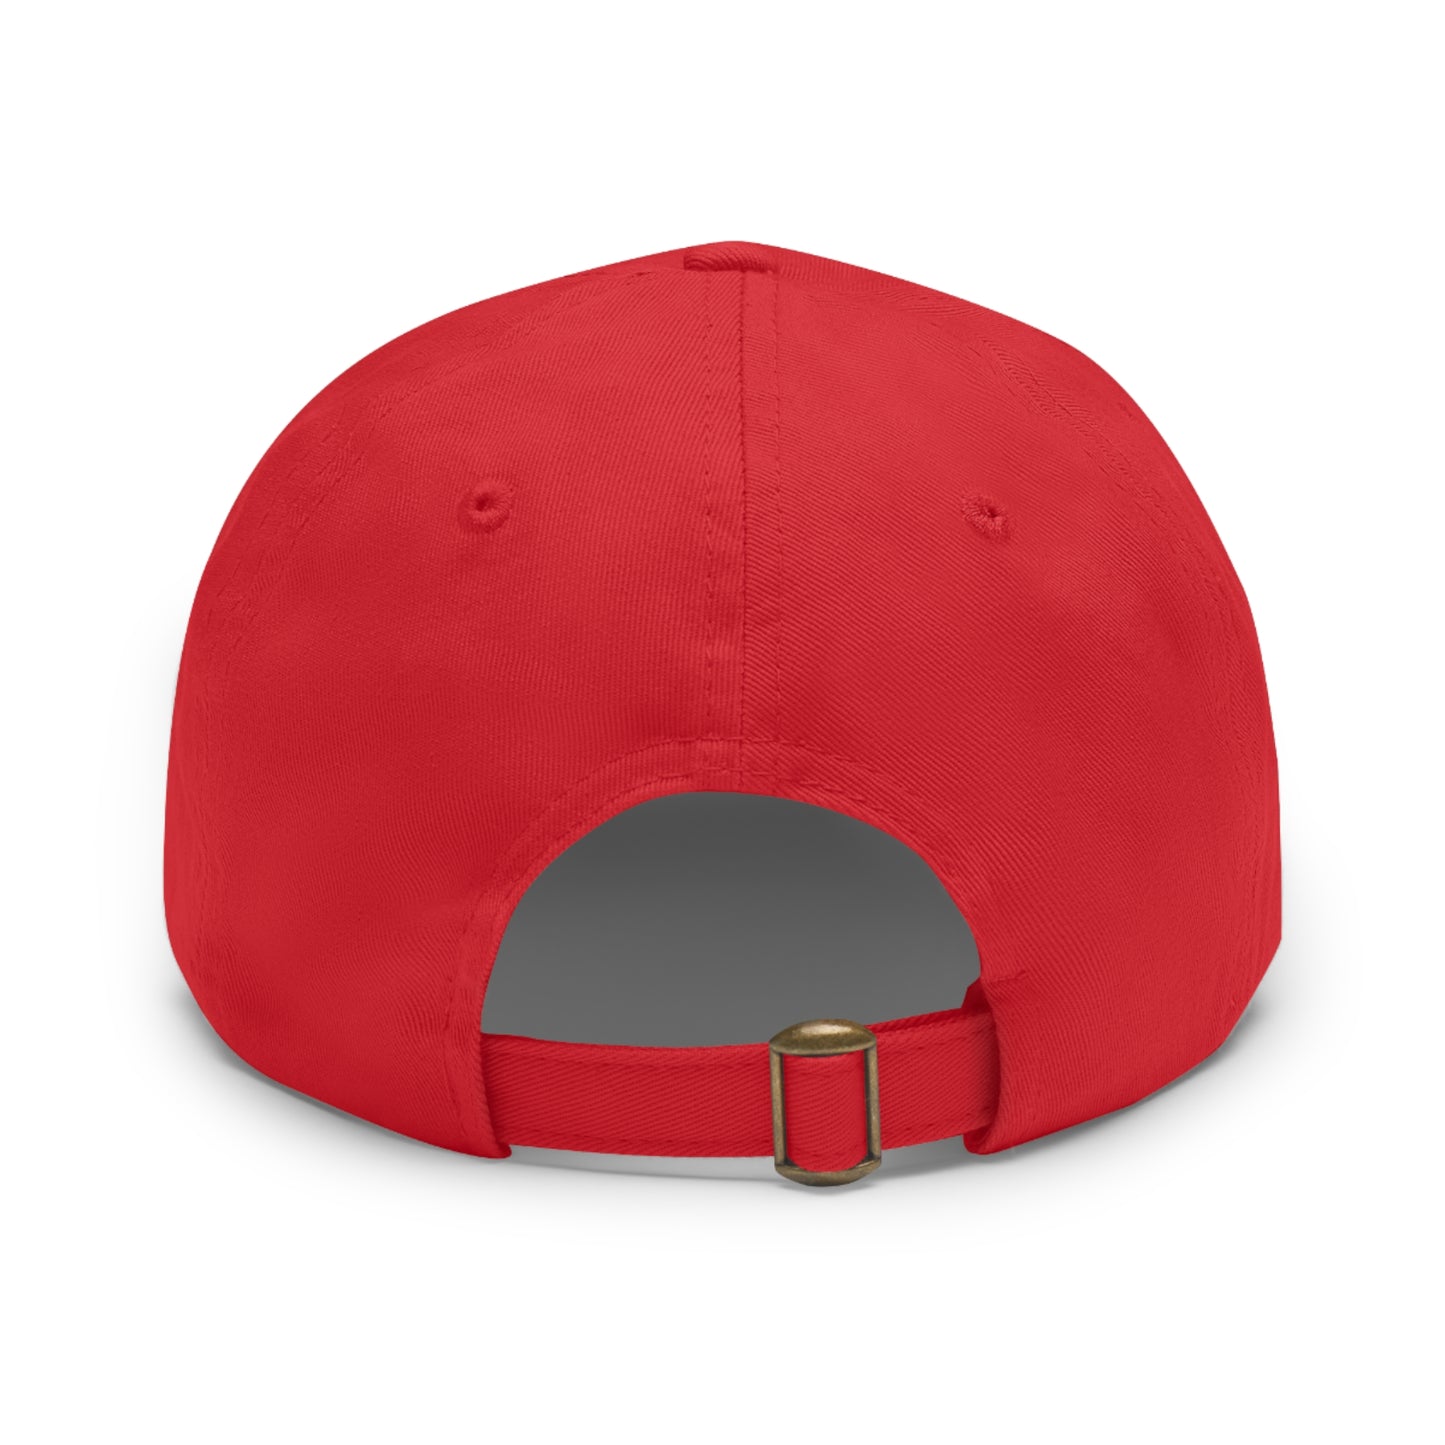 Drop Shot District Logo Pickleball Hat with Leather Patch